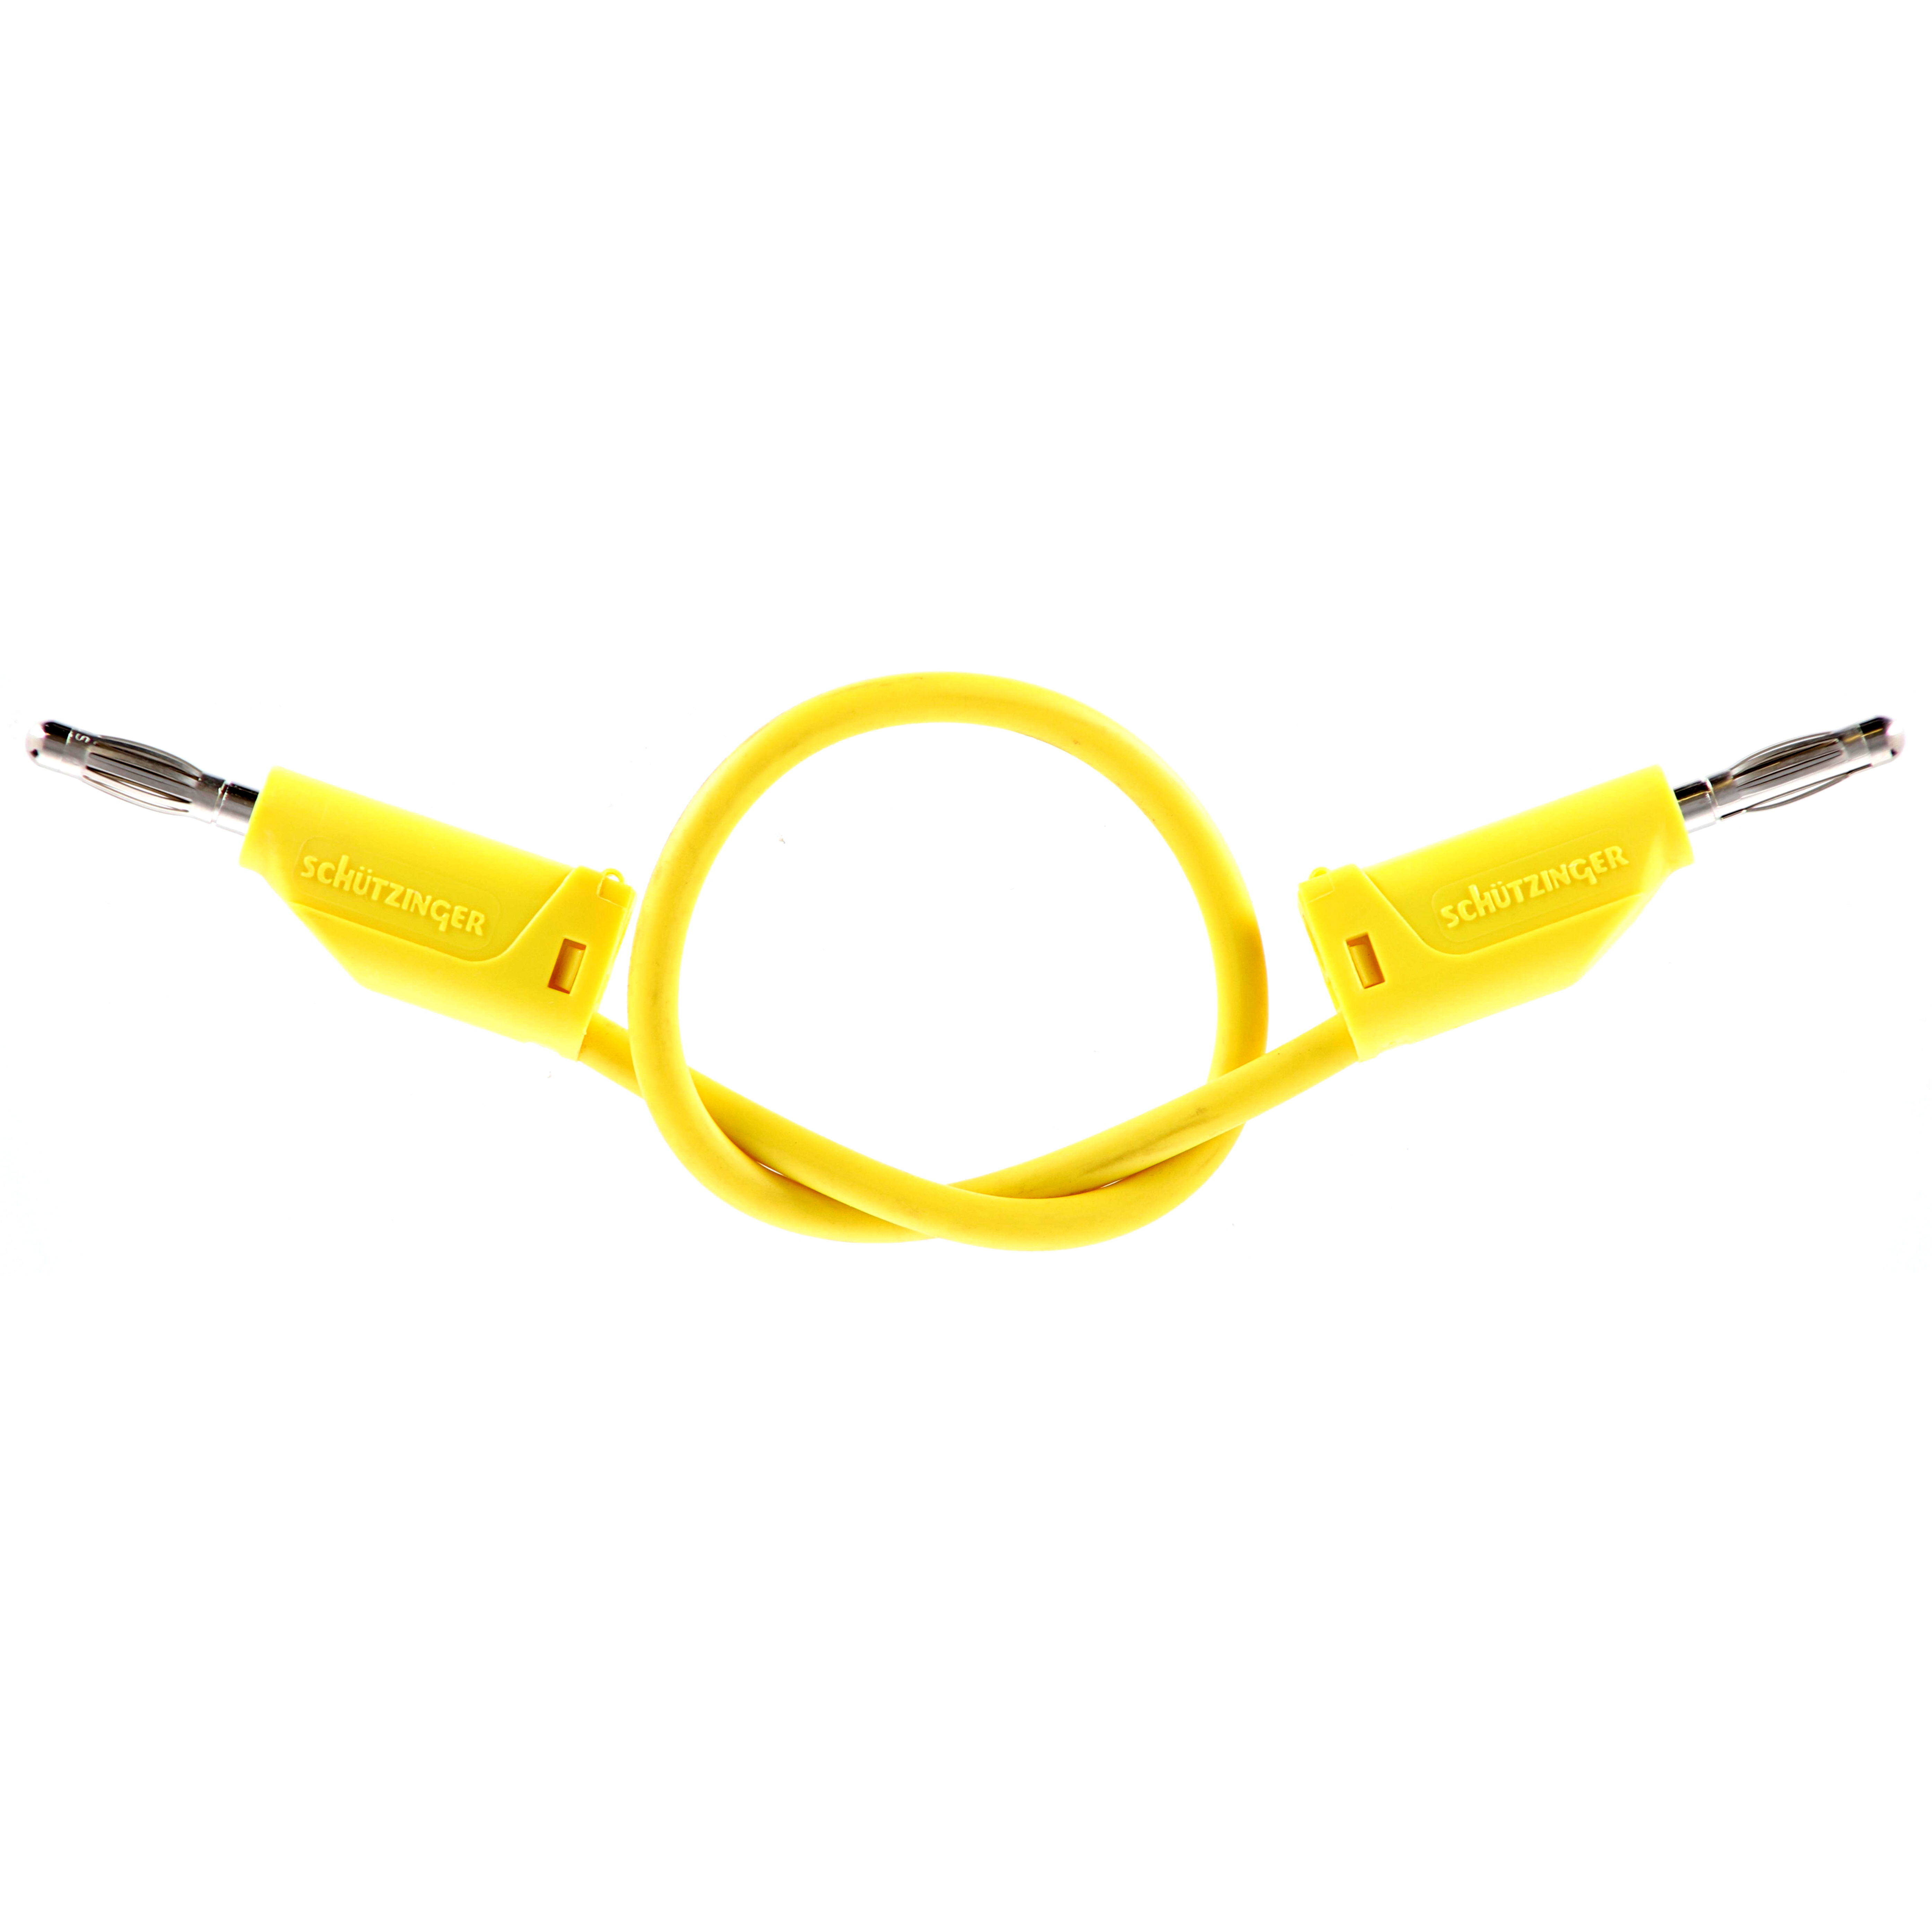 4mm Stackable Plug Lead 250mm - Yellow